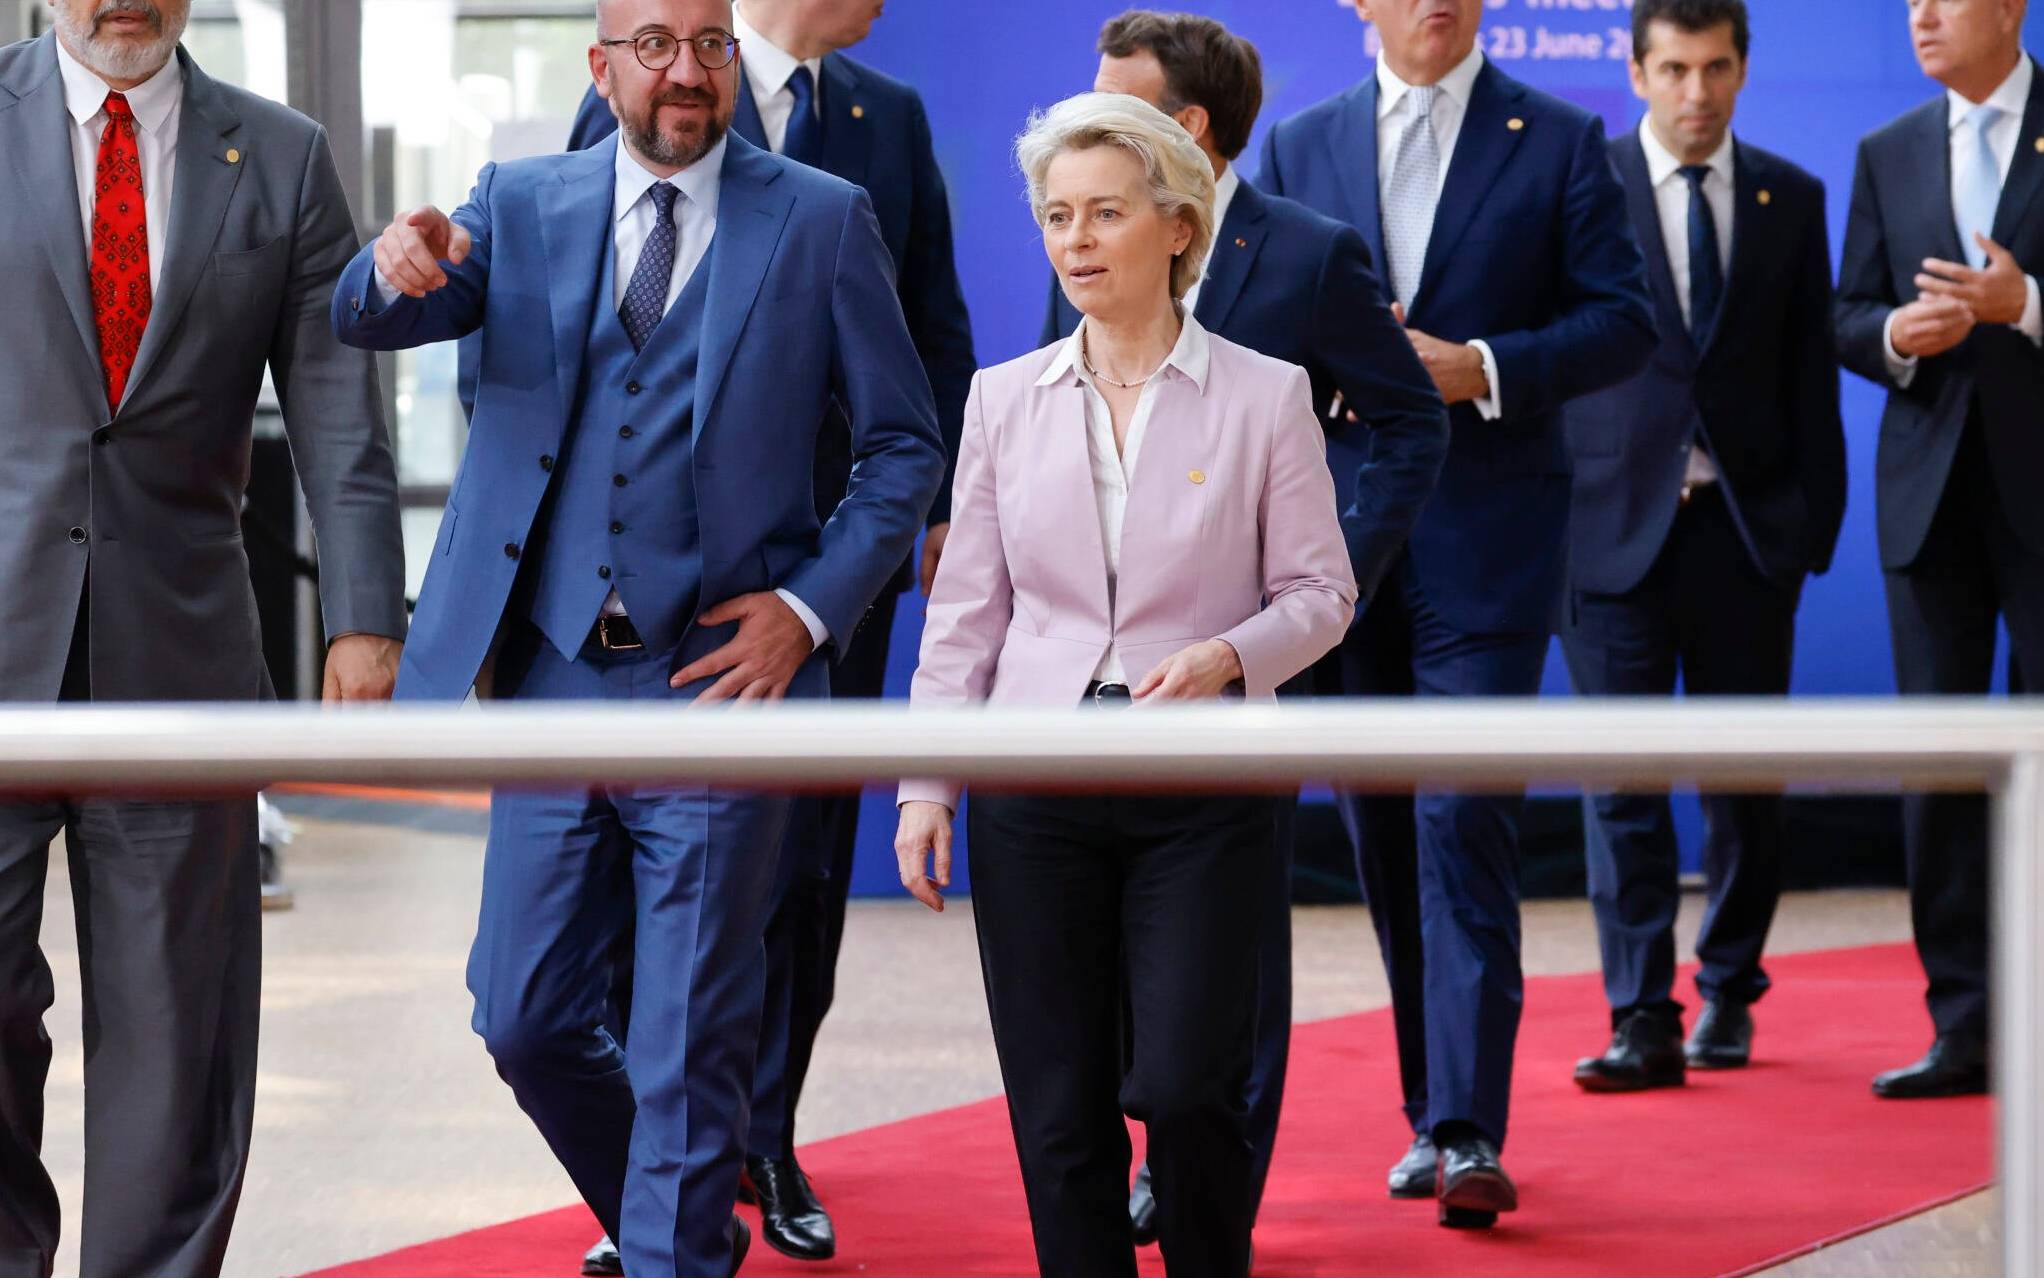 (From L/R) Prime Minister of Albania Edi Rama, President of the European Council Charles Michel and President of the European Commission Ursula von der Leyen arrive for a family photo during the EU-Western Balkans leaders' meeting in Brussels on June 23, 2022. - The European Union, which at a summit on June 23 and 24, 2022, will discuss whether to make Ukraine a membership candidate, has admitted over 15 countries in the past three decades. (Photo by Ludovic MARIN / AFP)